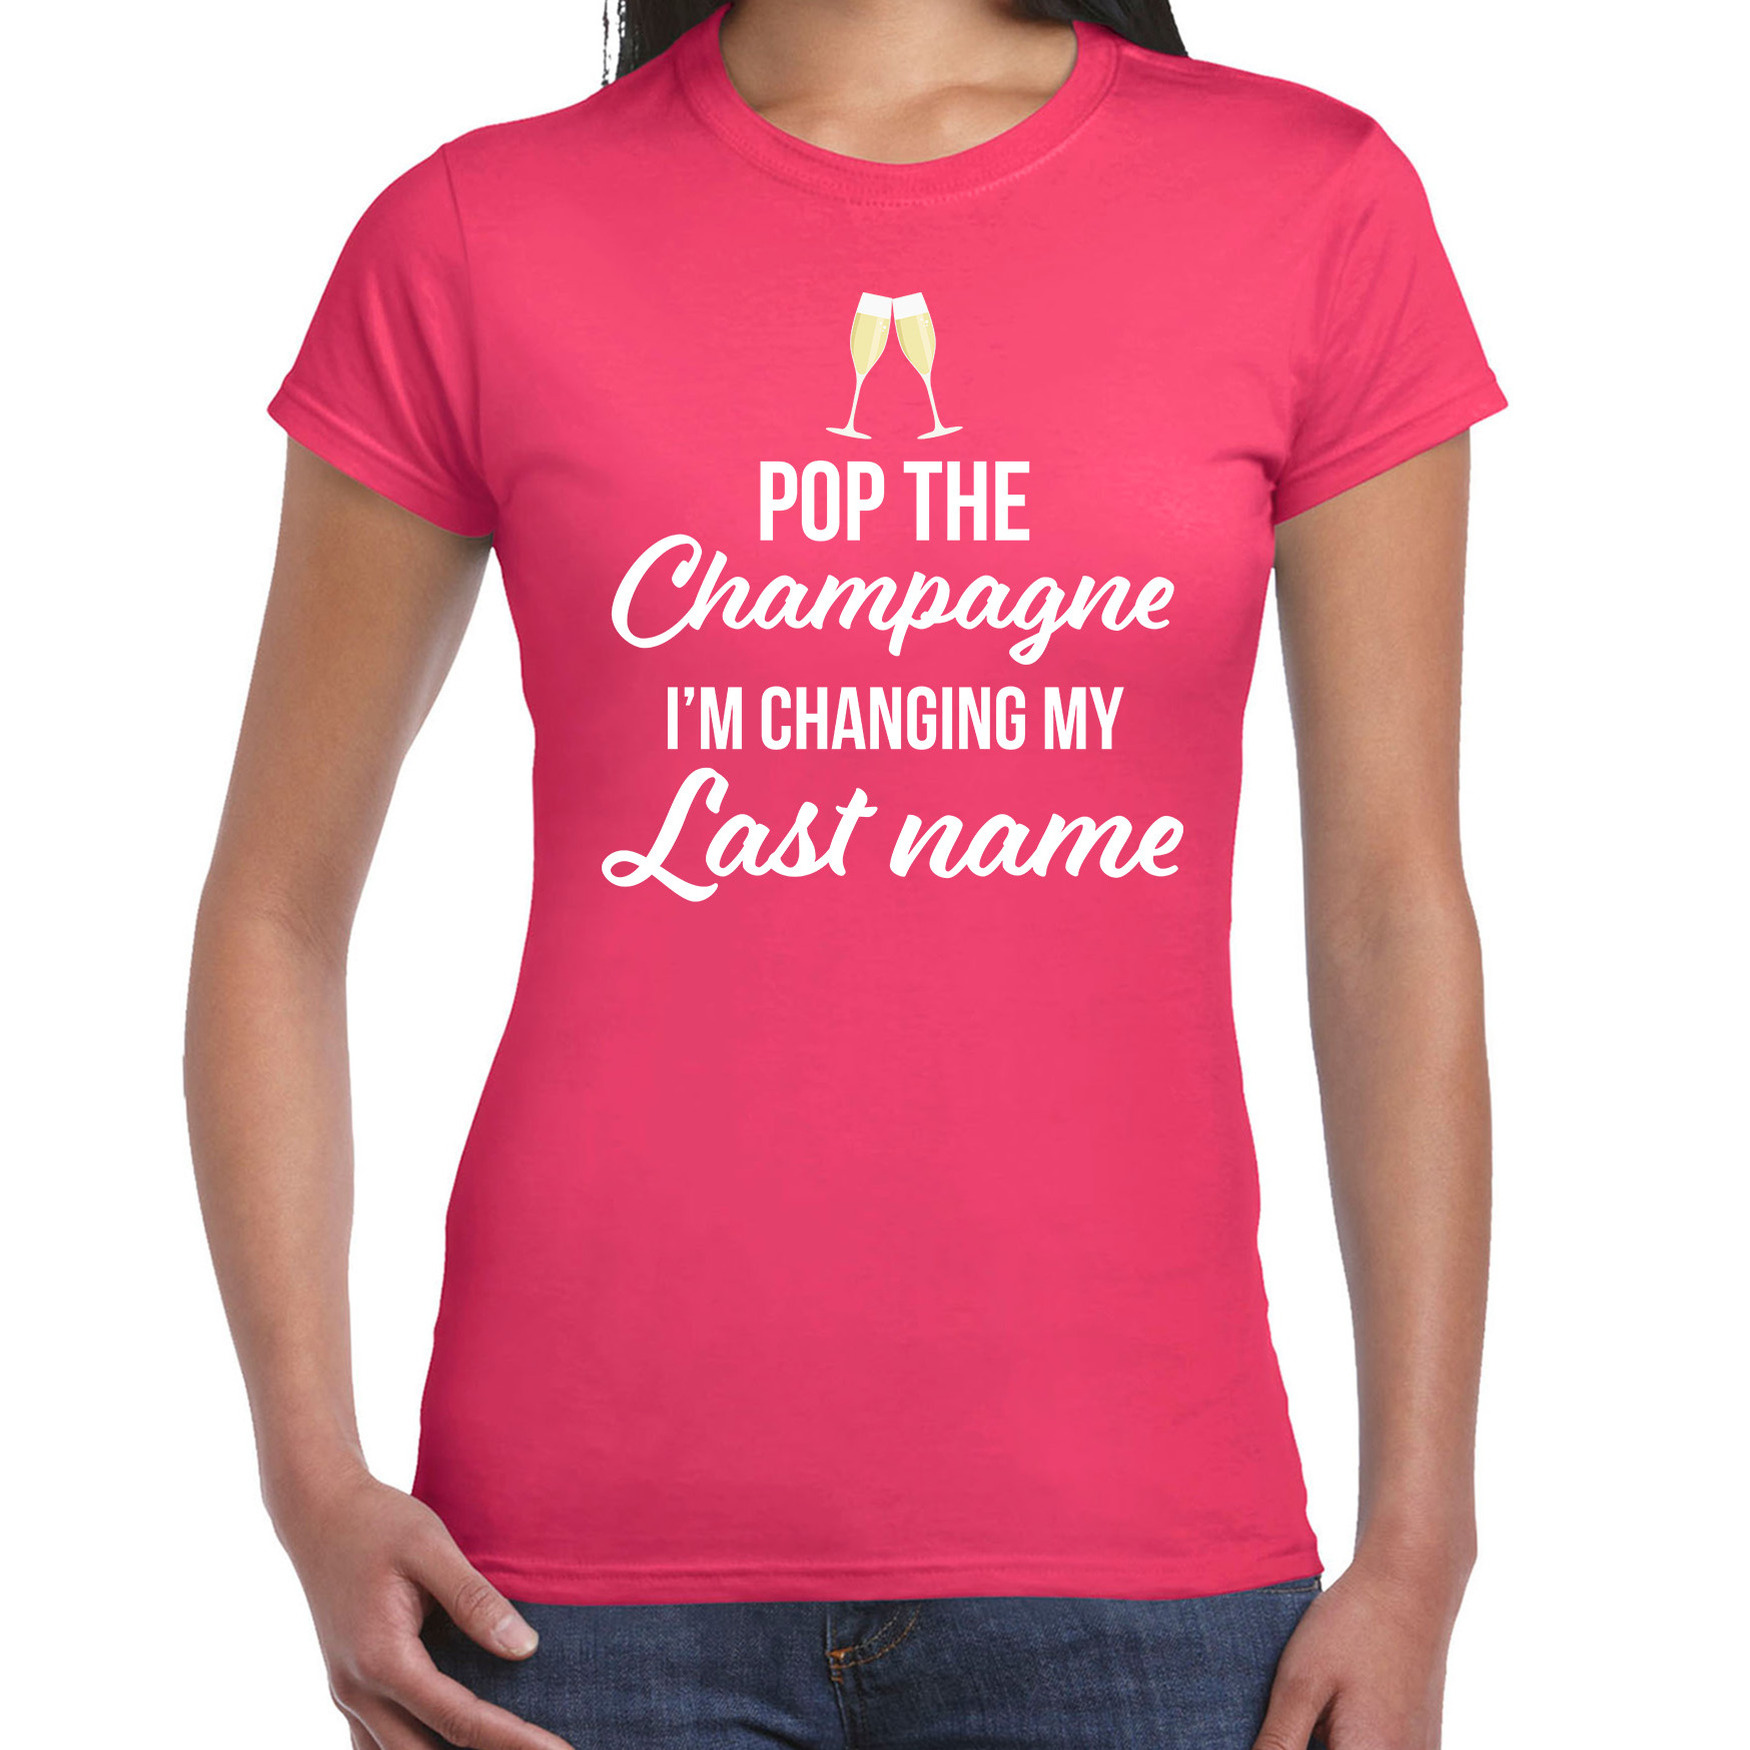 Pop champagne changing last name t-shirt roze voor dames